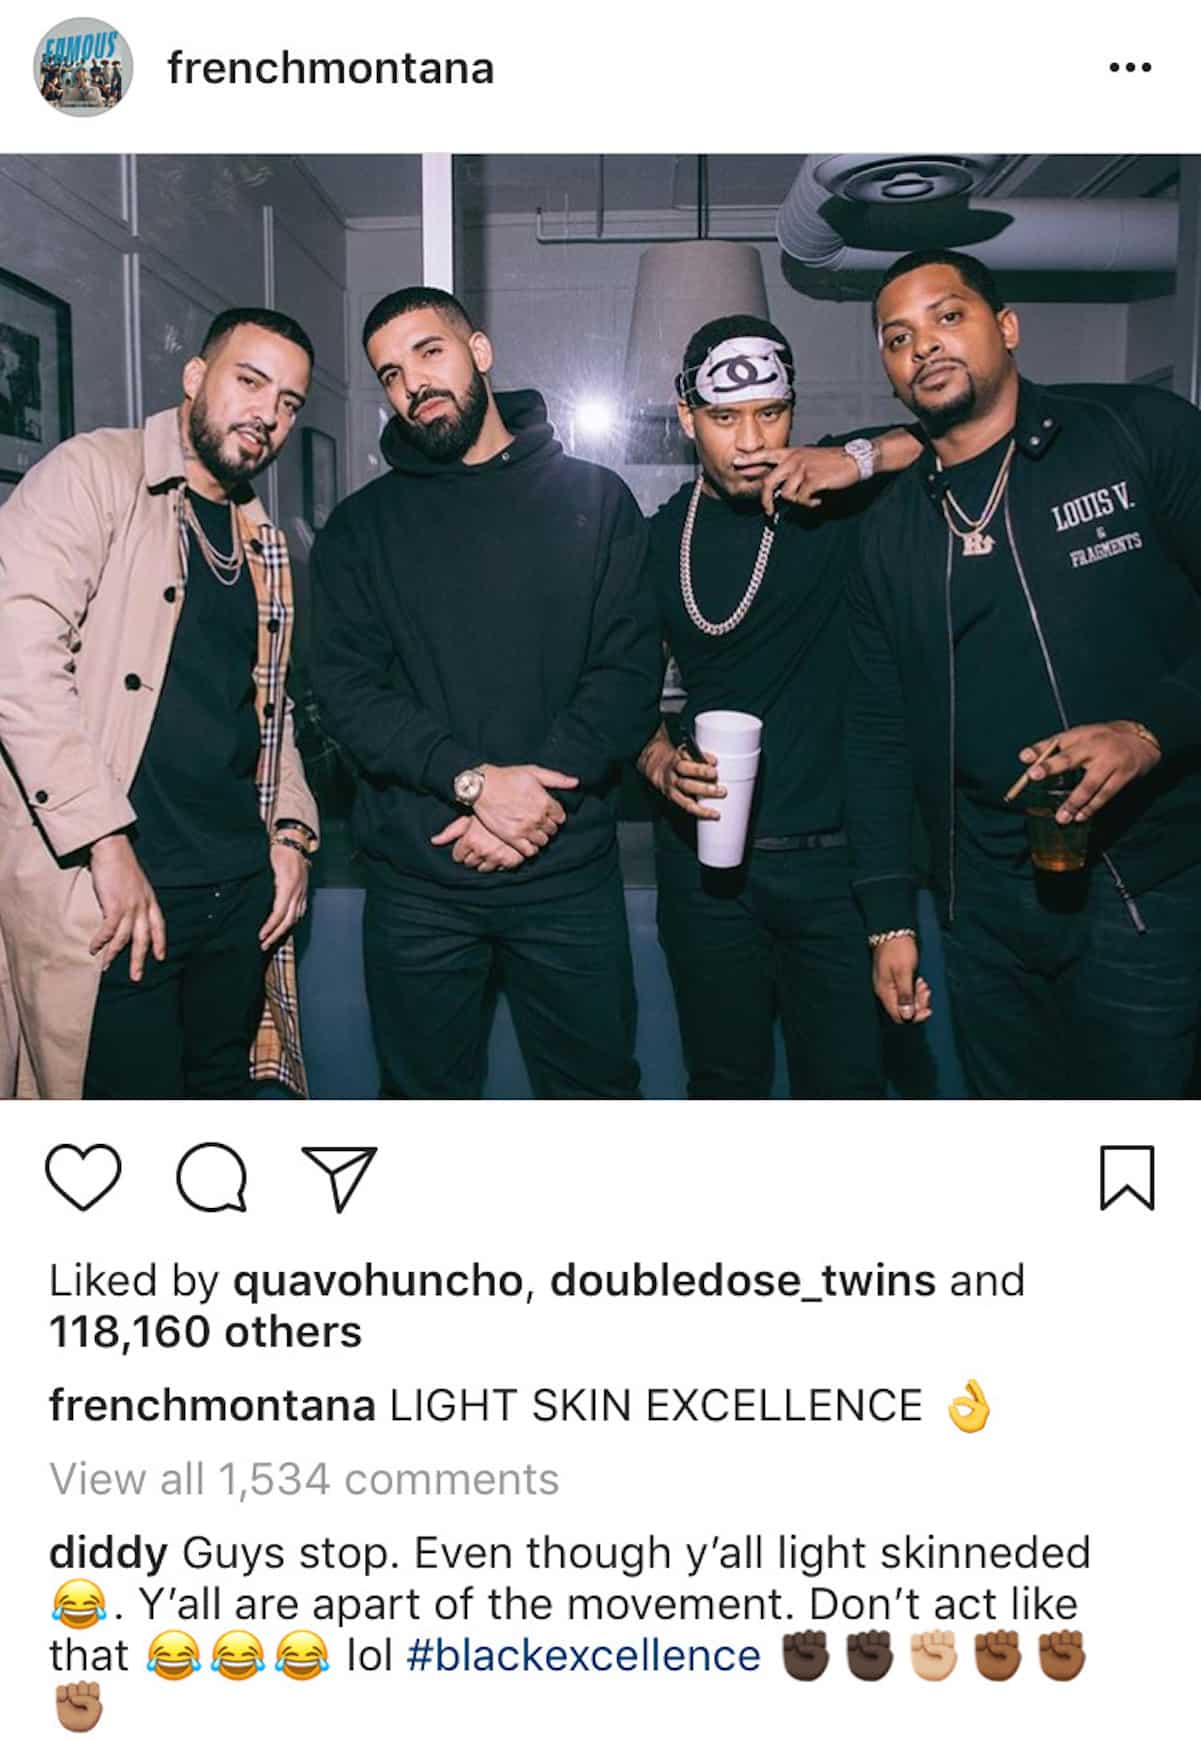 french montana light skin excellence